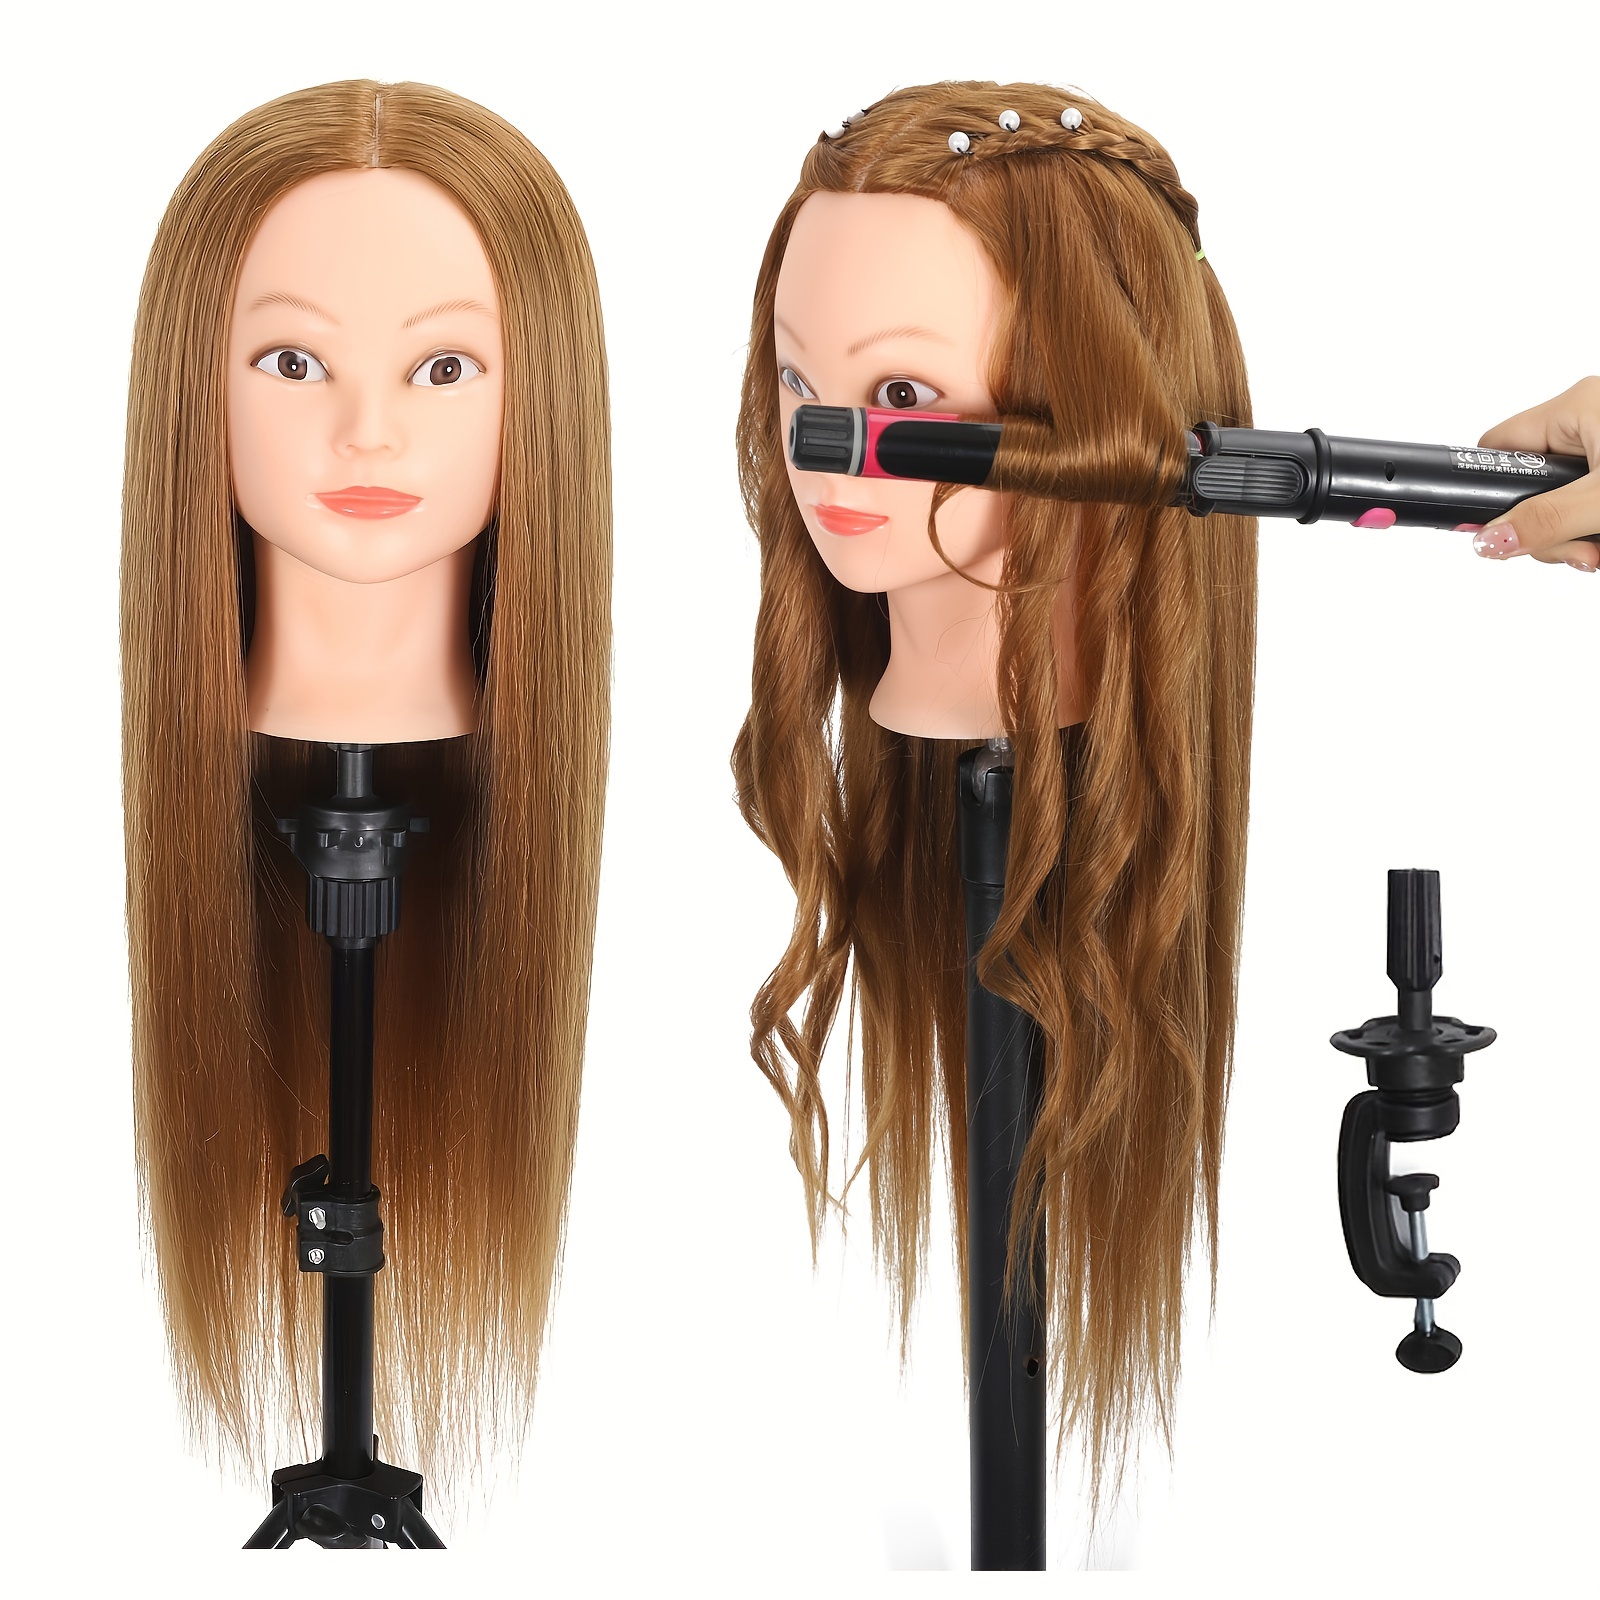 Mannequin Head With Real Hair Hairdresser Cosmetology Training Practice Head  For Braiding Styling Beauty School Manikin